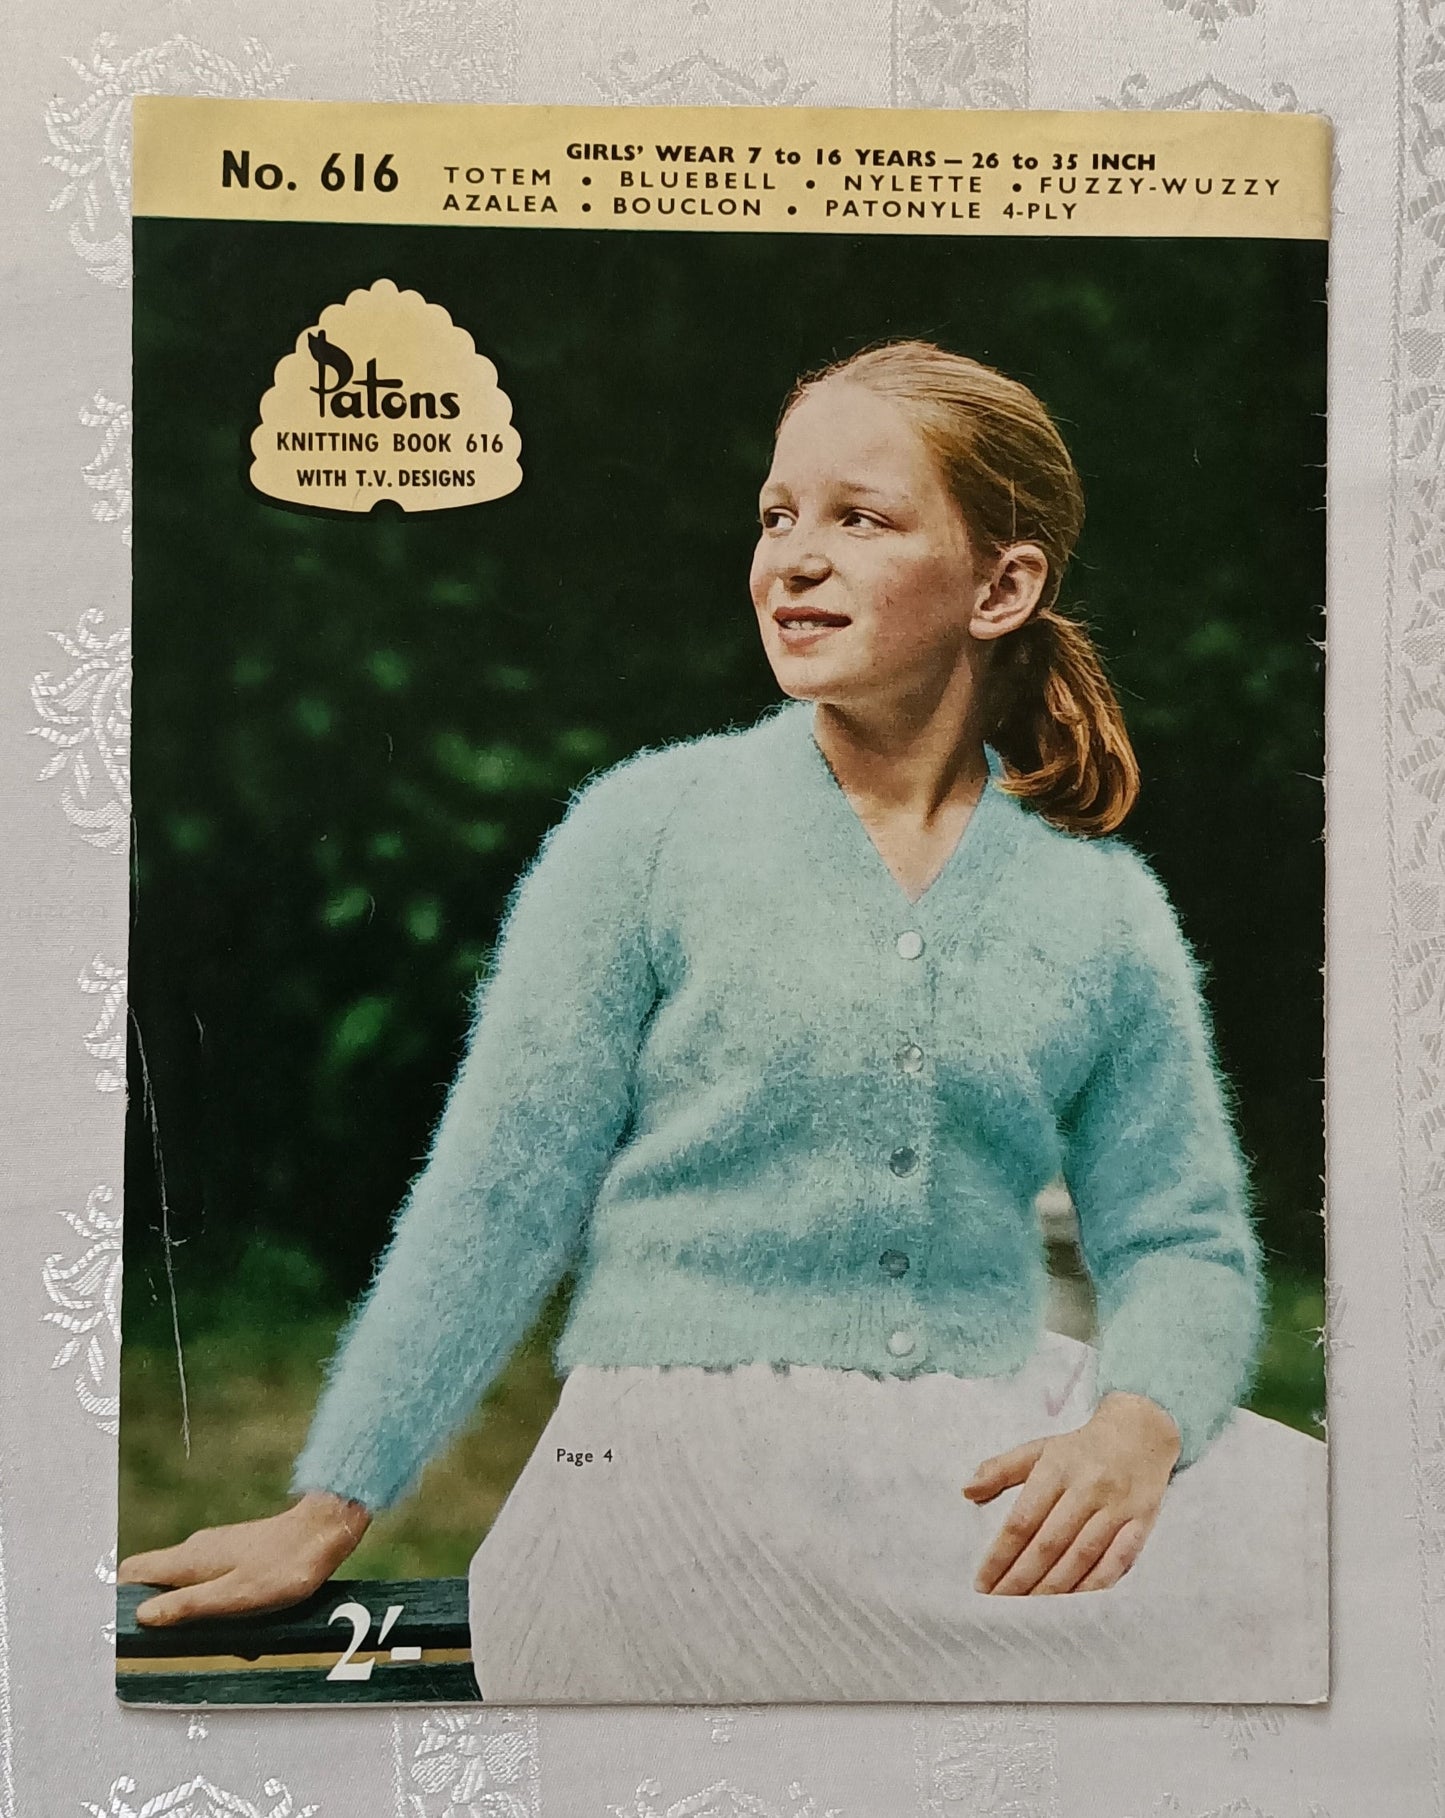 Patons knitting book 616 knitting patterns for girls 7 - 16, coat, jumpers and cardigans.